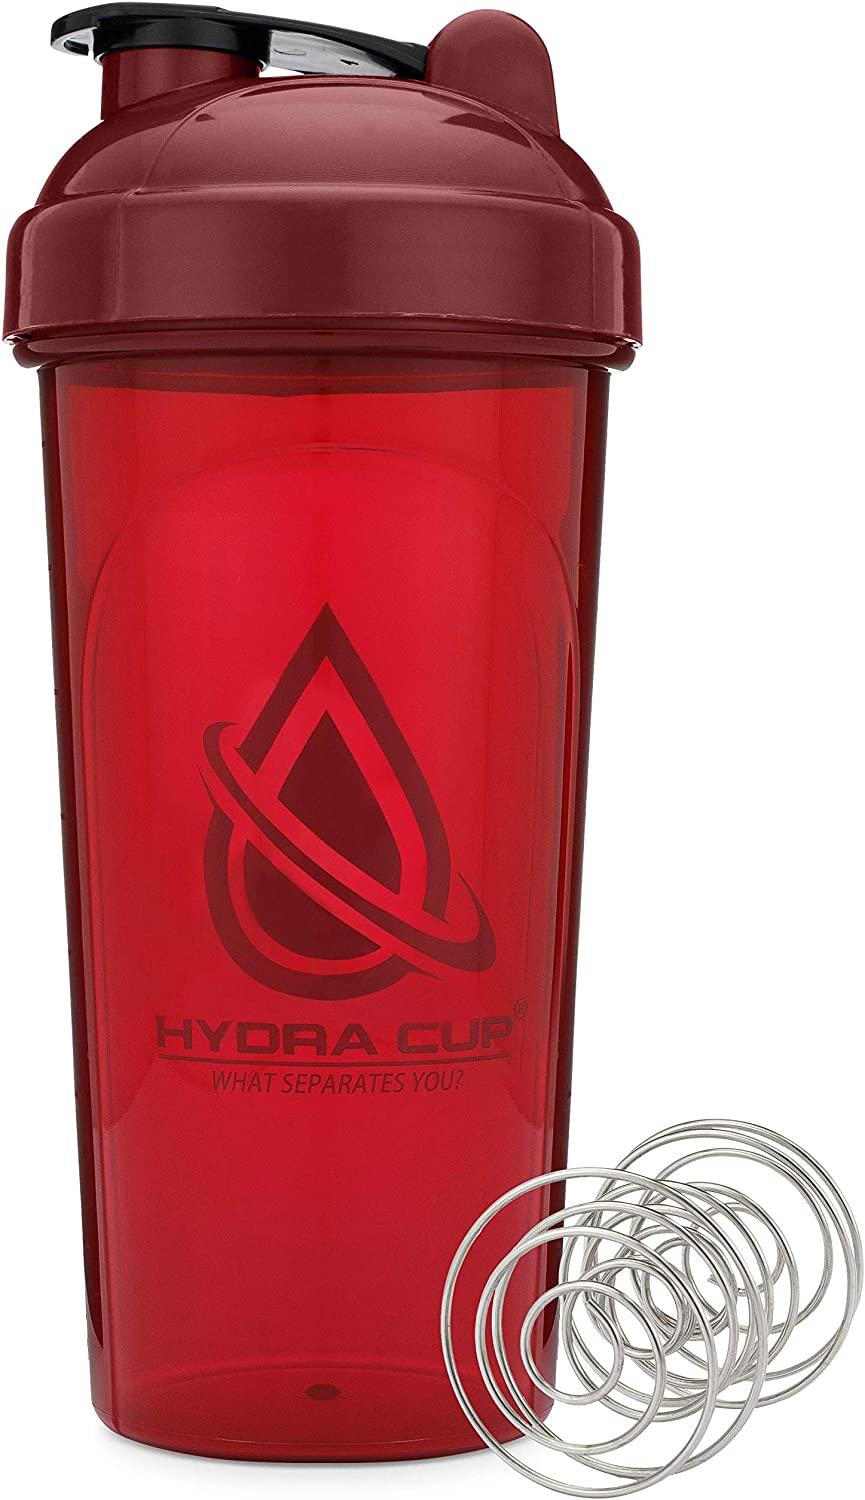  Hydra Cup [4 Pack] - Protein Powder Funnel & Three